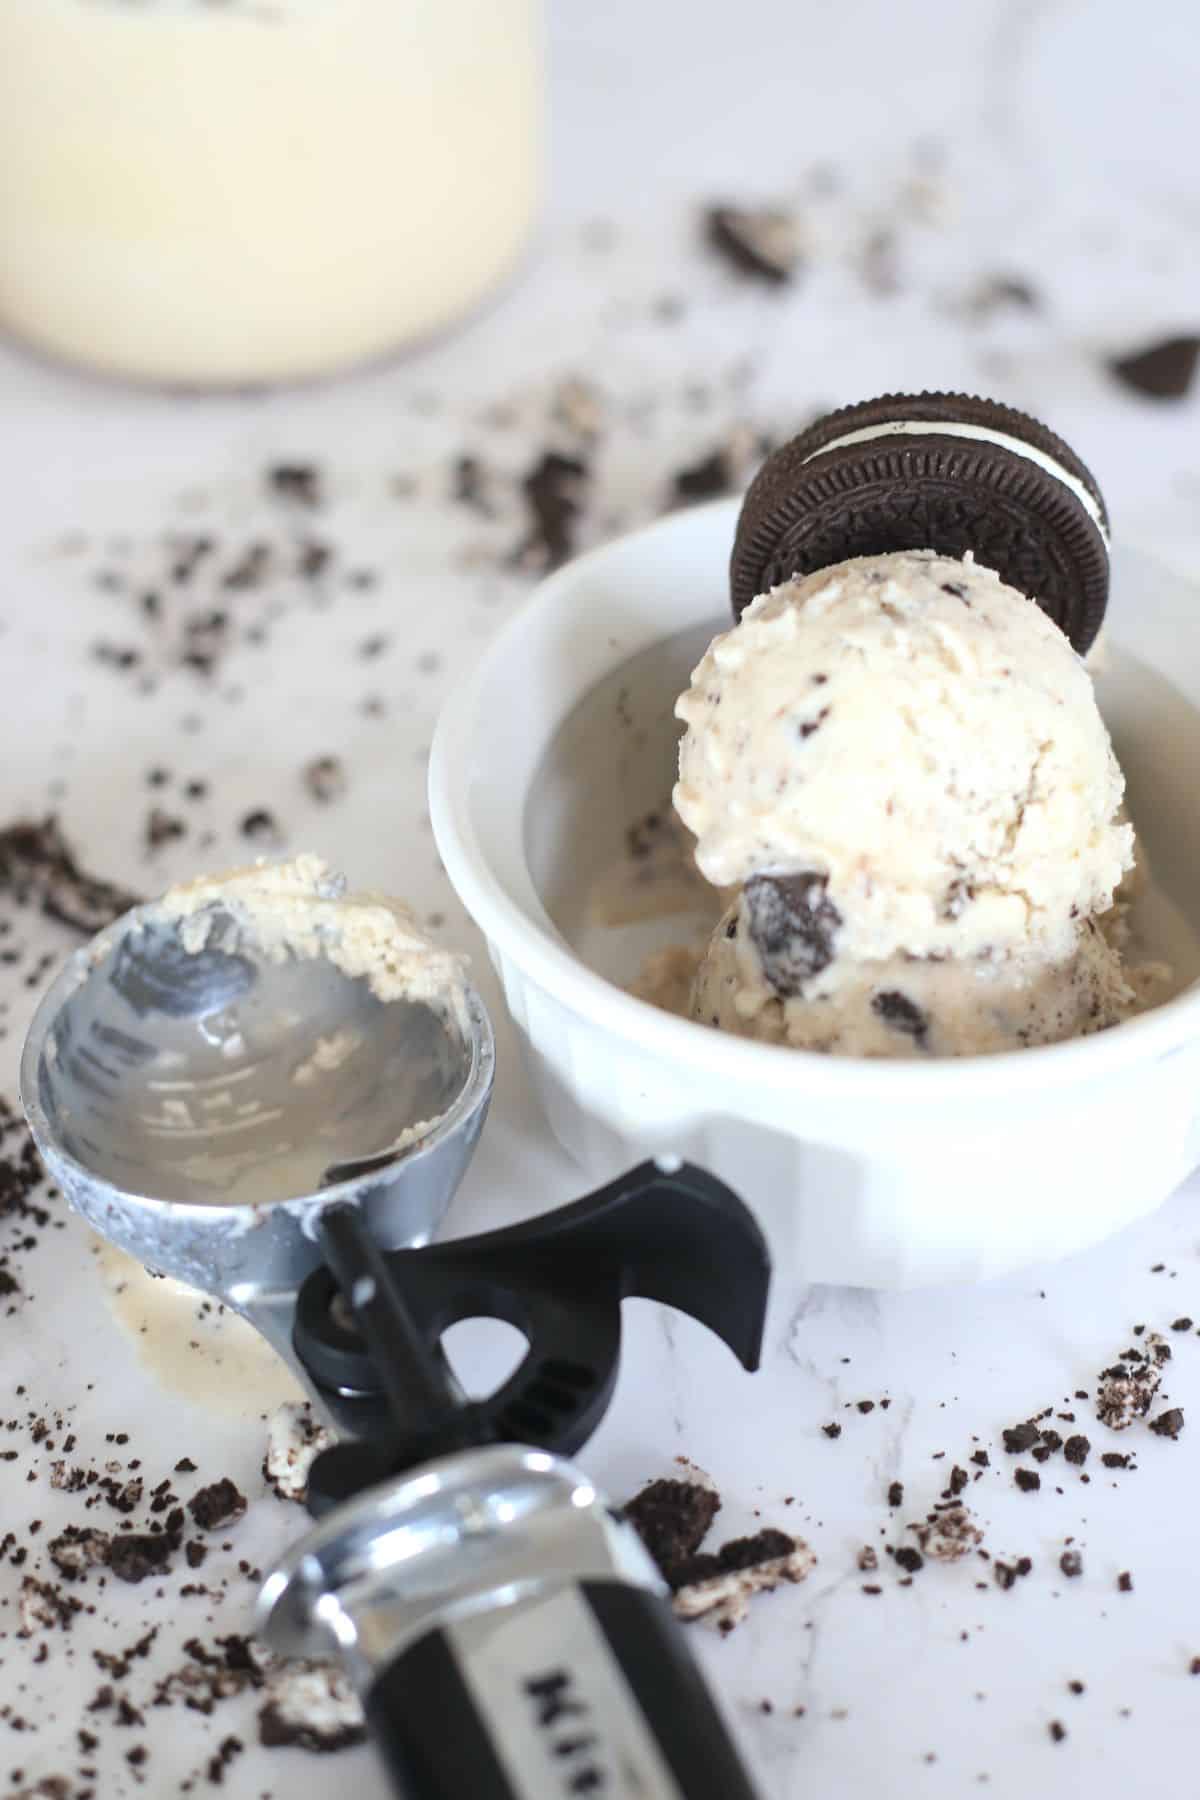 cookies and cream ice cream in a small white bowl next to an ice cream scoop.